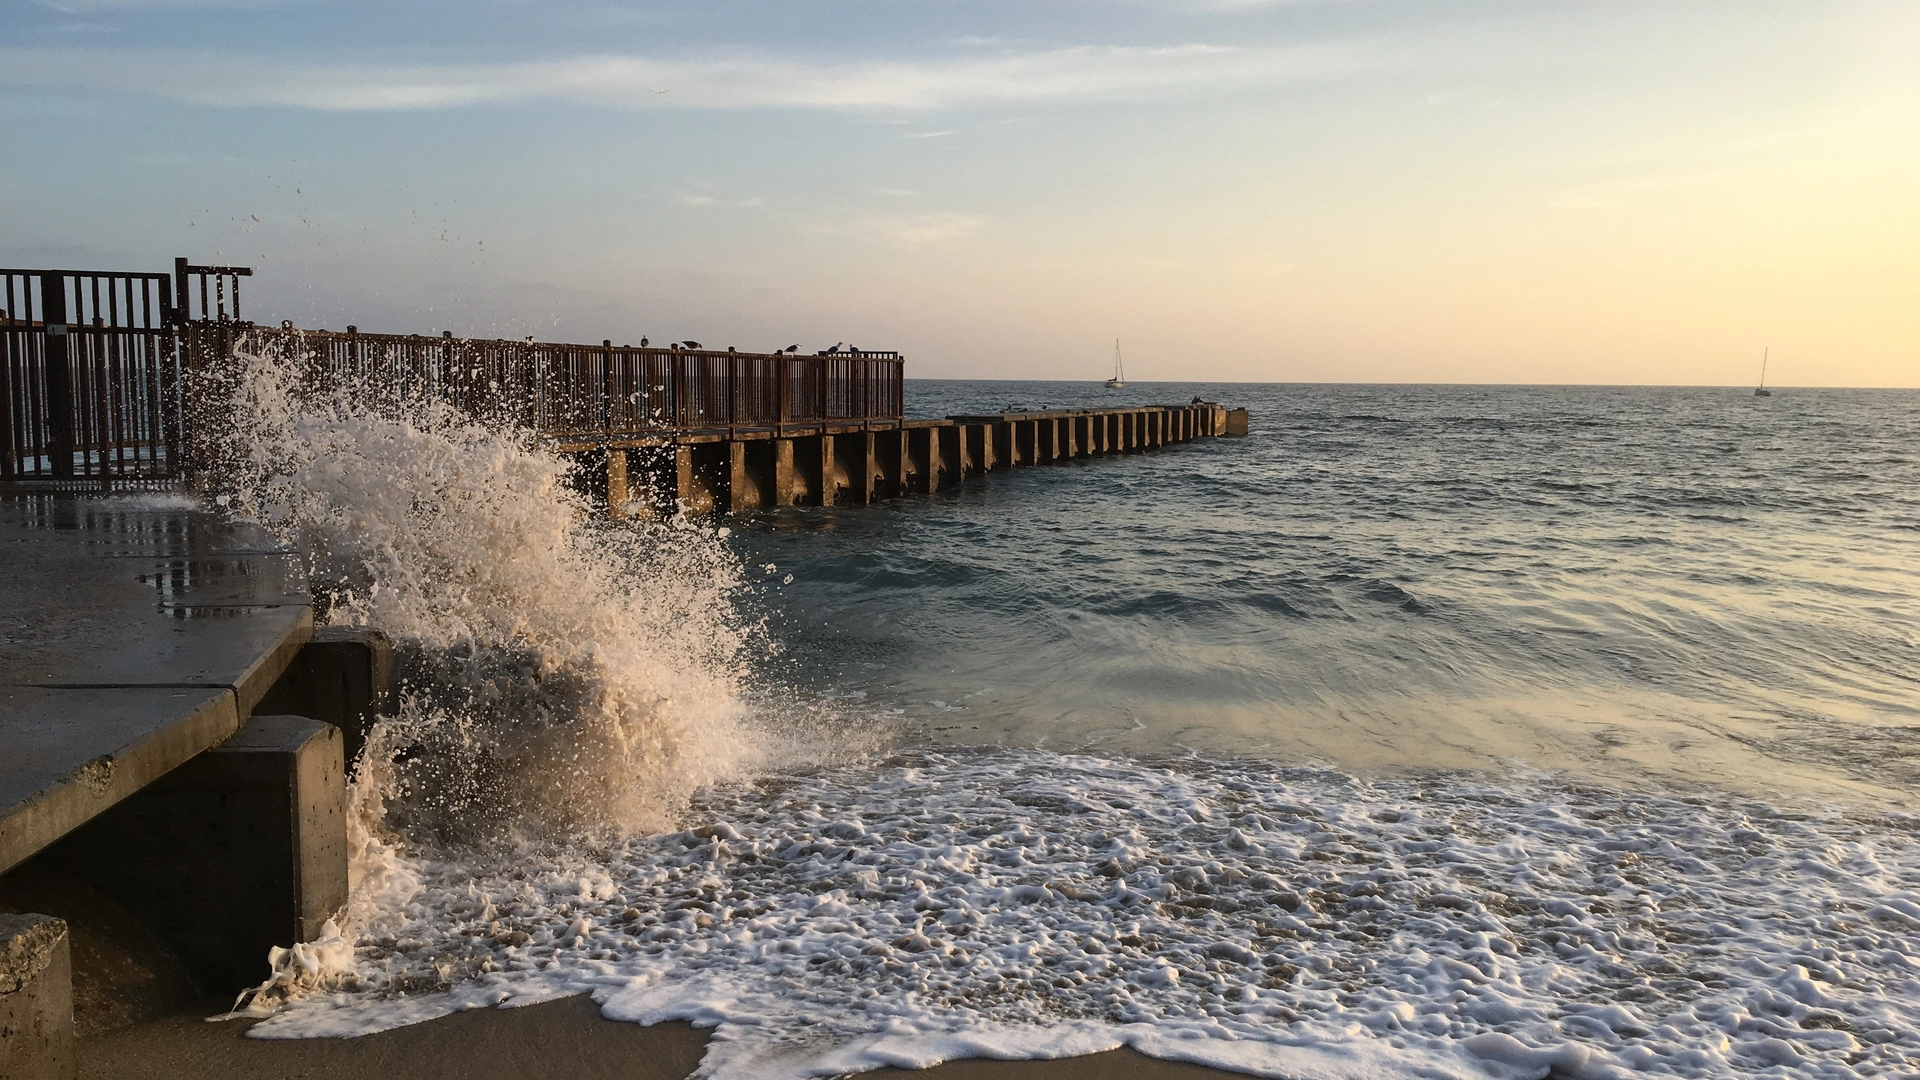 Waves crash against a jetty in Playa Del Rey, California, at sunset.